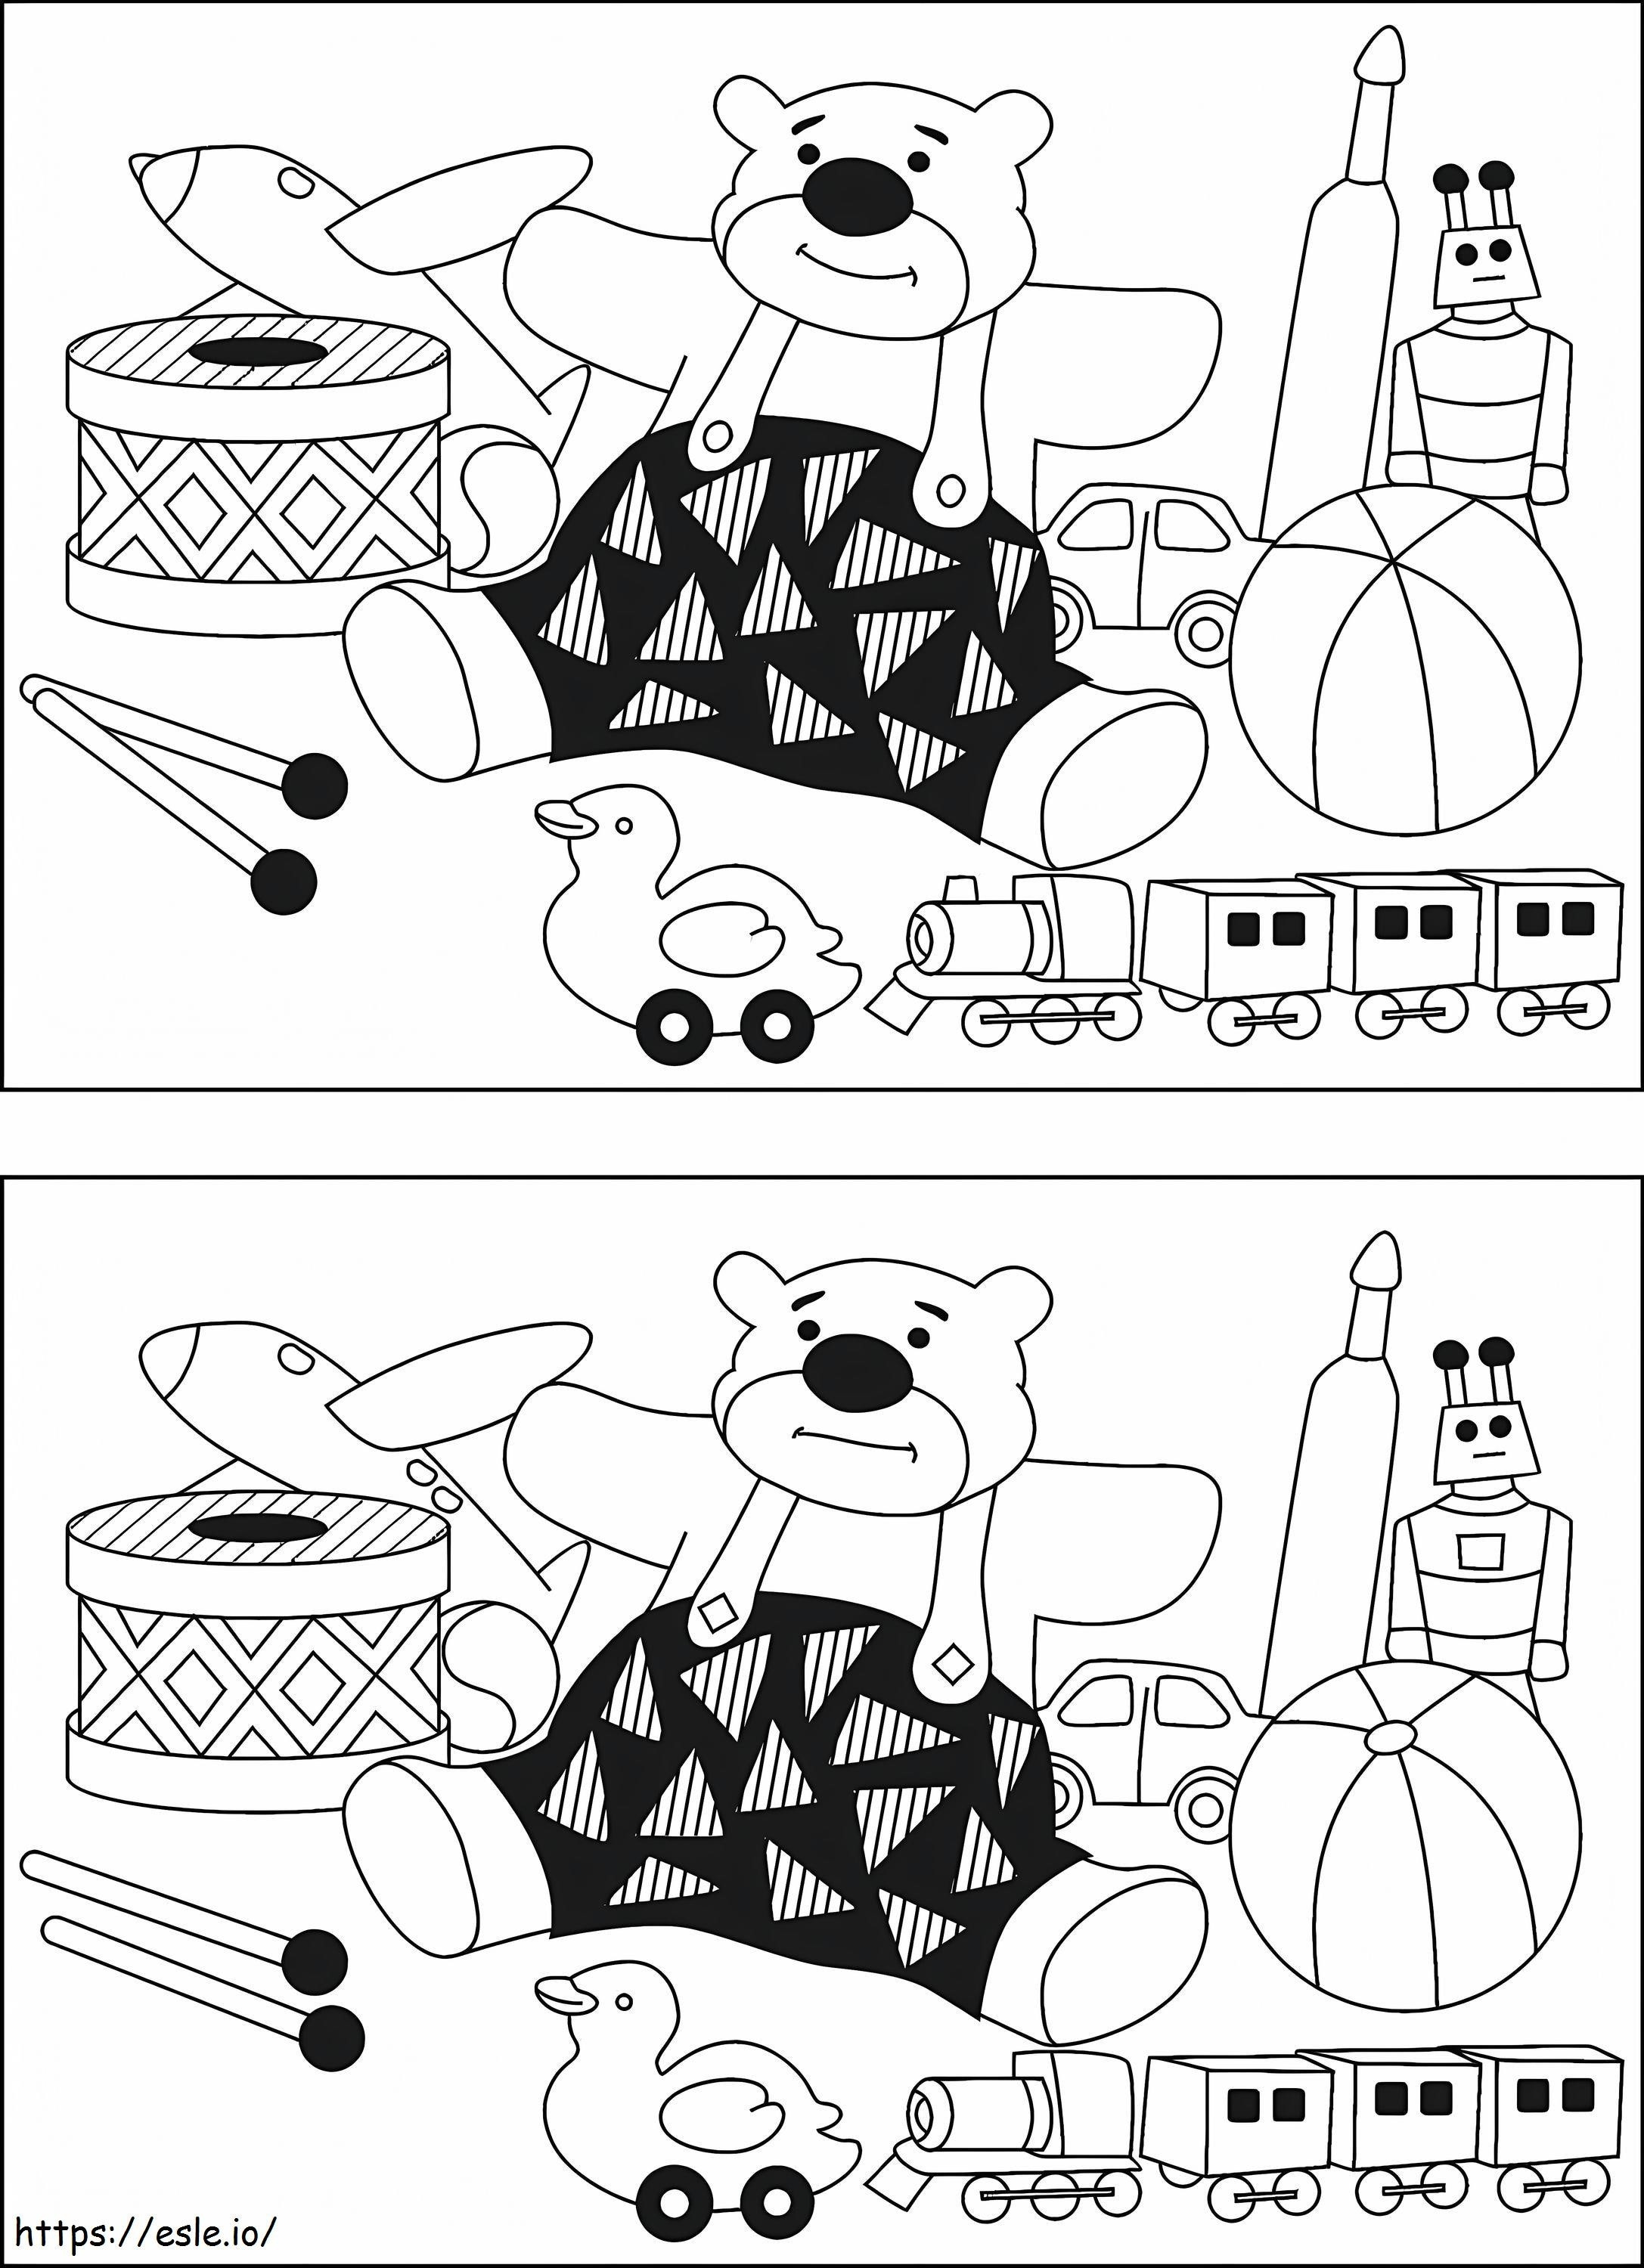 Printable Find The Differences coloring page